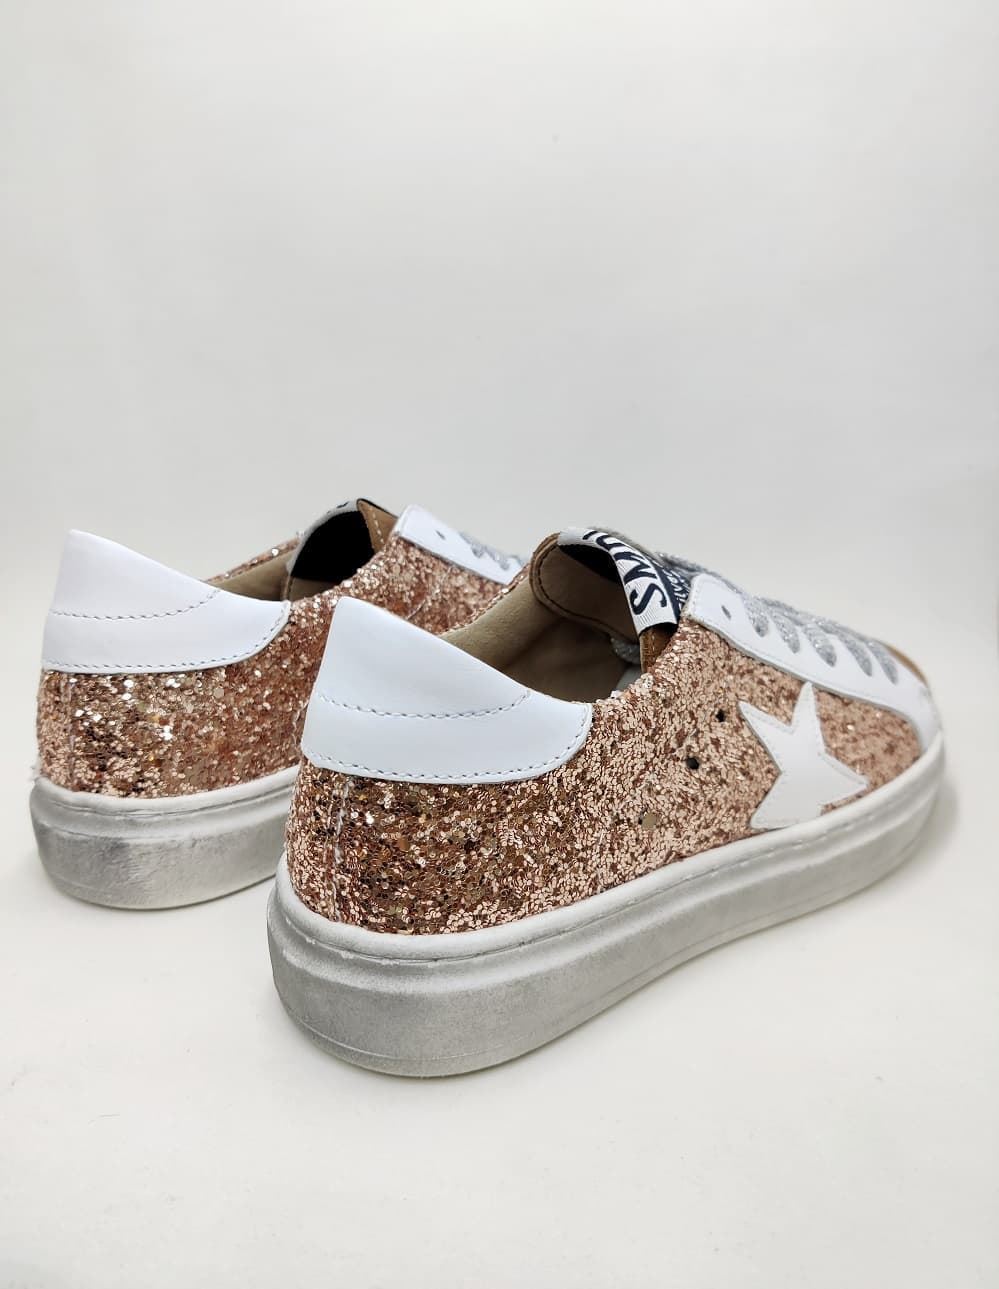 Golden Star Sneakers in Glitter Nude and Mink - Image 3